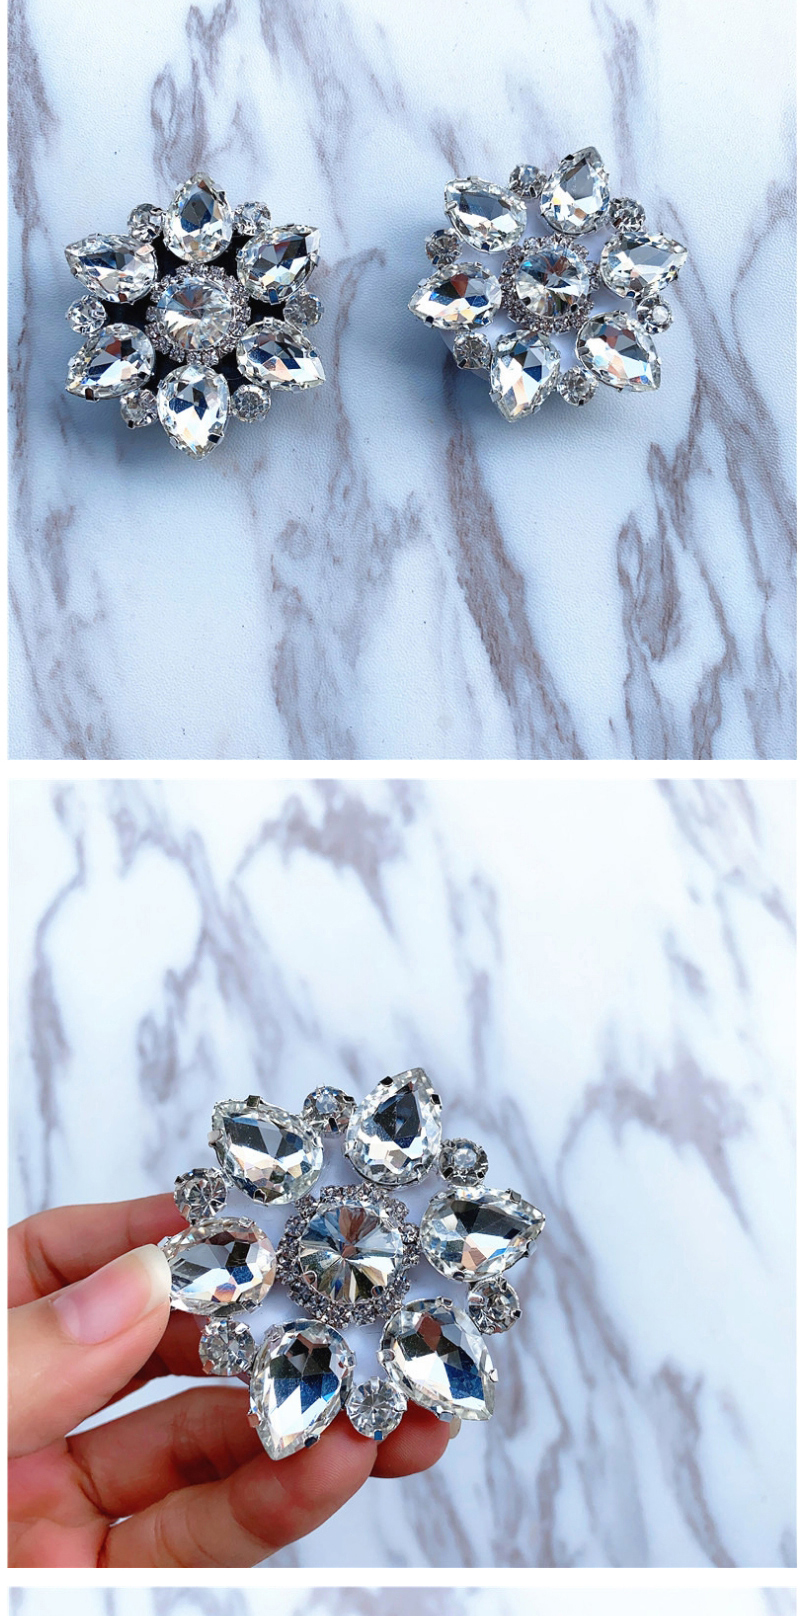 Fashion Square No. 4-silver Color Bottom Jeweled Cubic Crystal Stand Ring Clasp,Phone Hlder